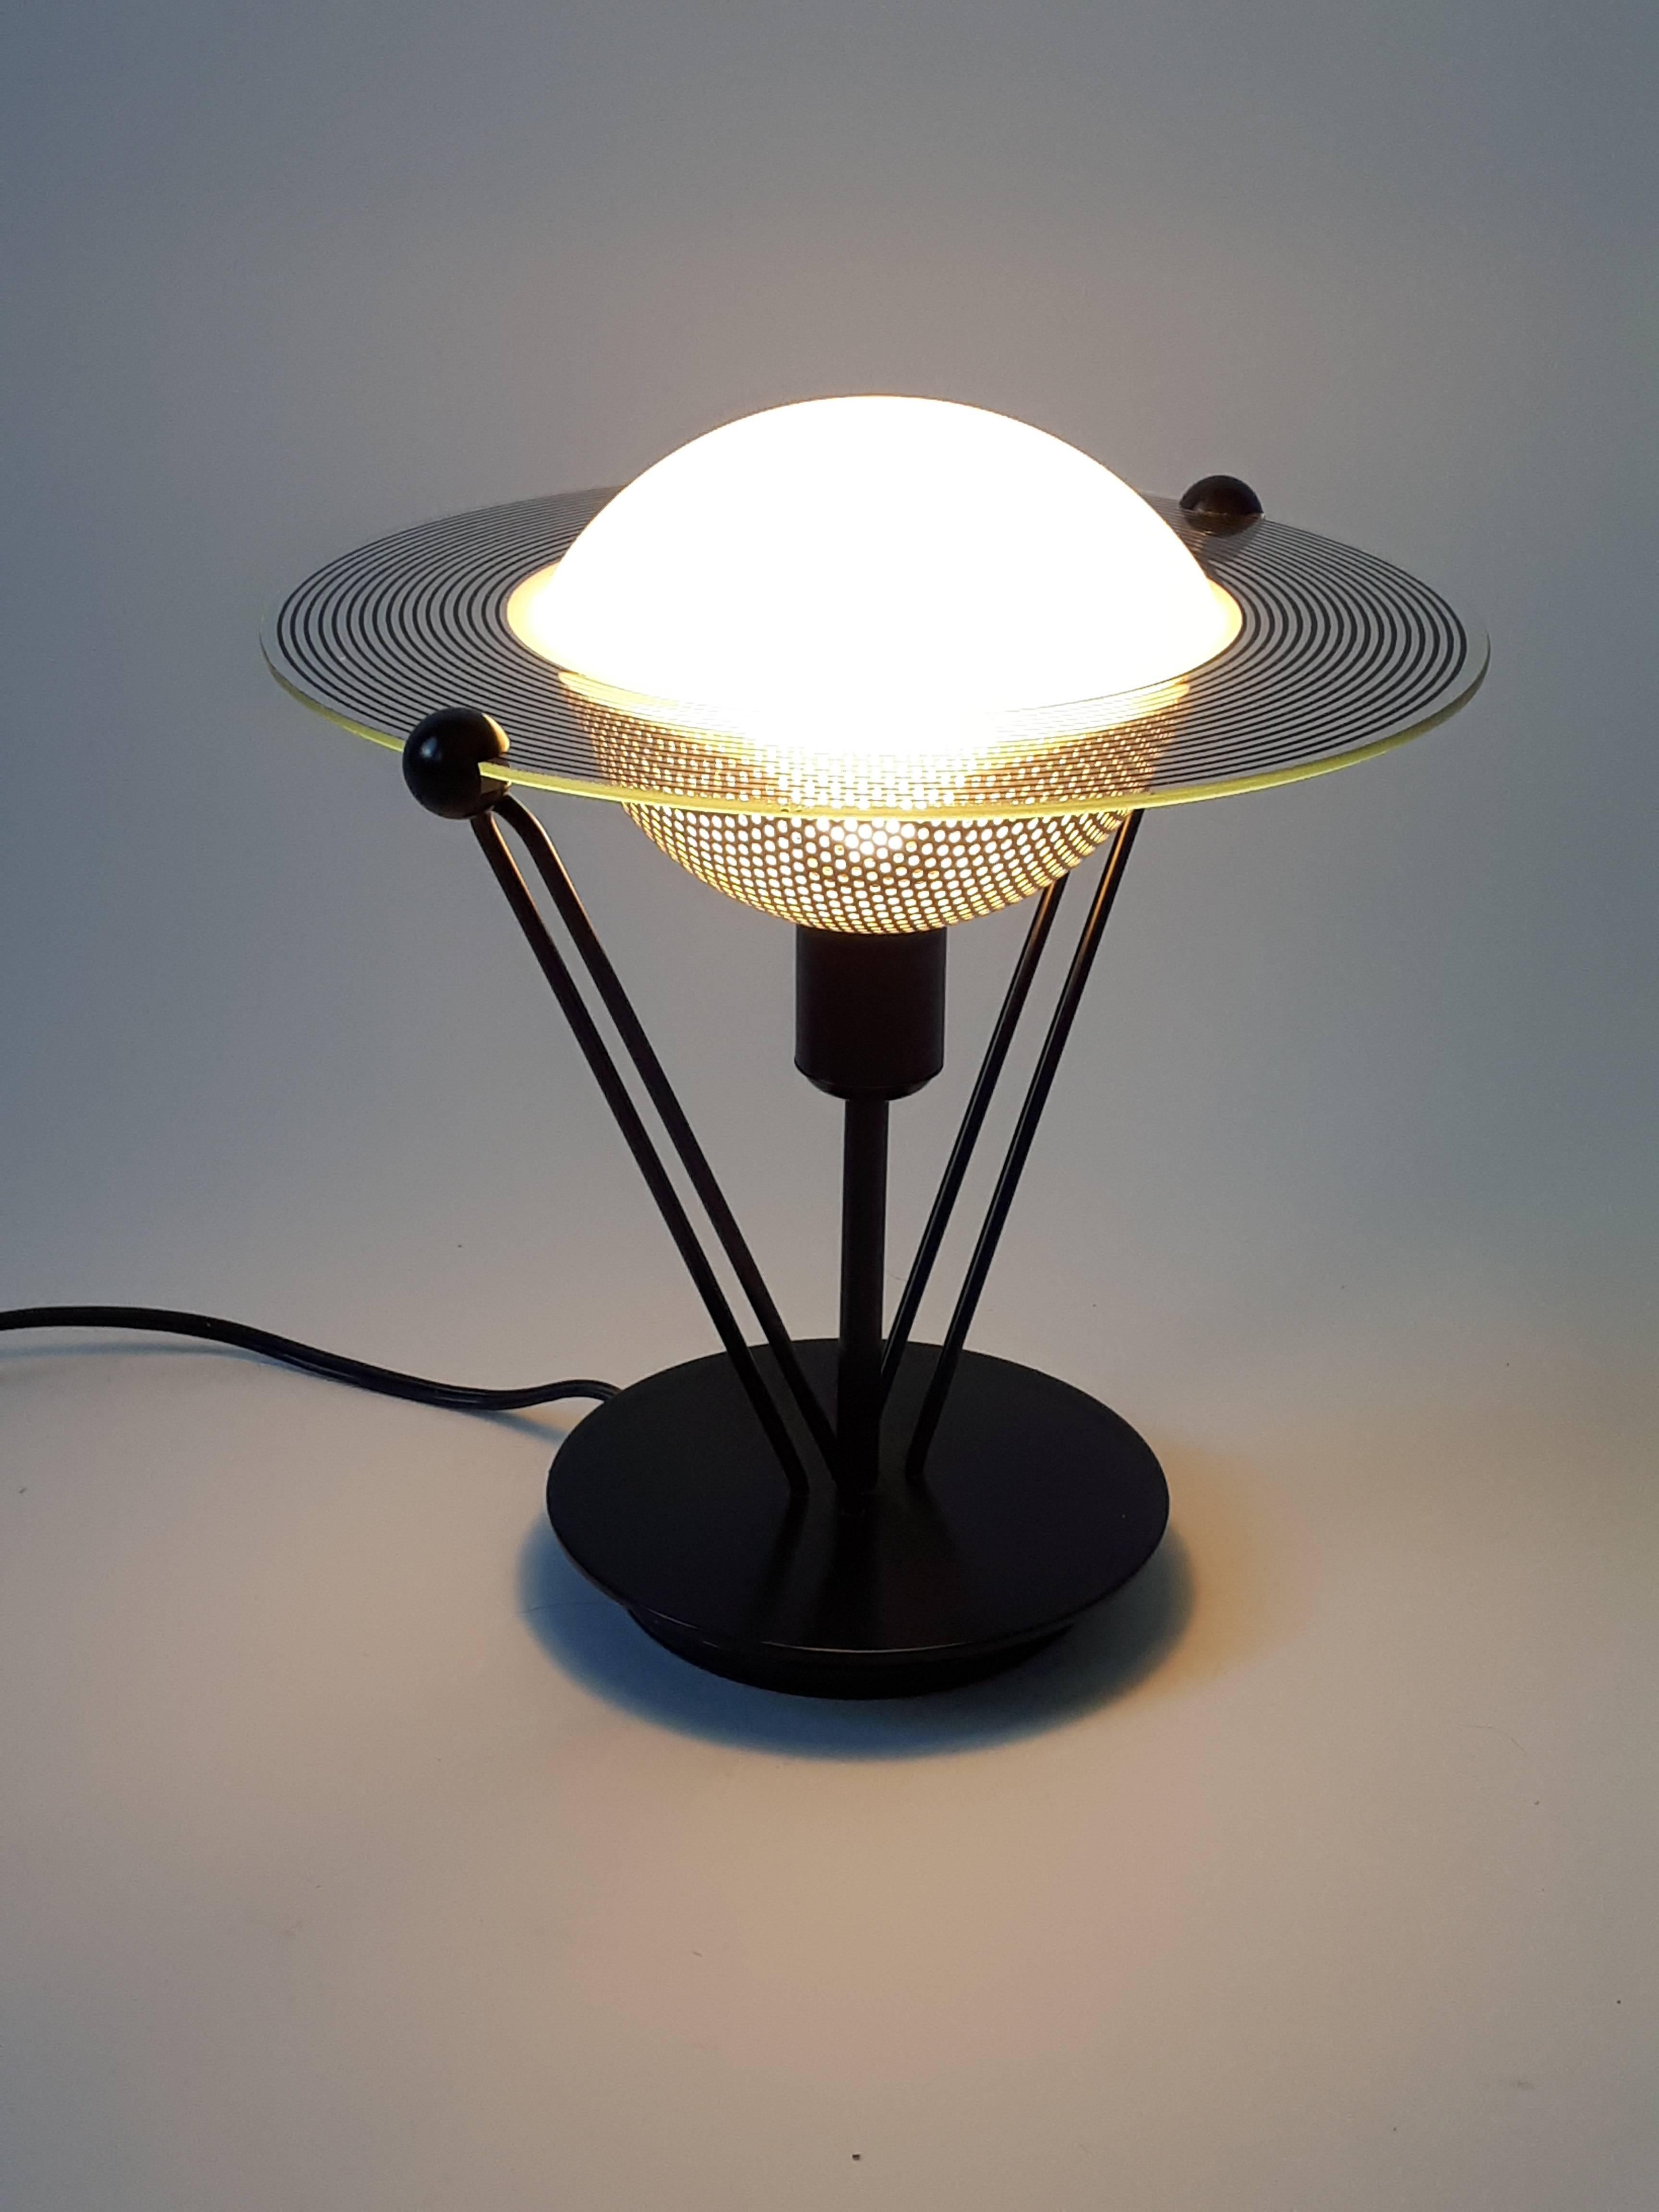 Small , solid and well made black semi-gloss metal base and structure.

Off white  pierced grill under. 

Measure 10.5 inches high. 

Contain one E12 candelabra size light bulb rated at 60 watts max. 

Switch on cord.